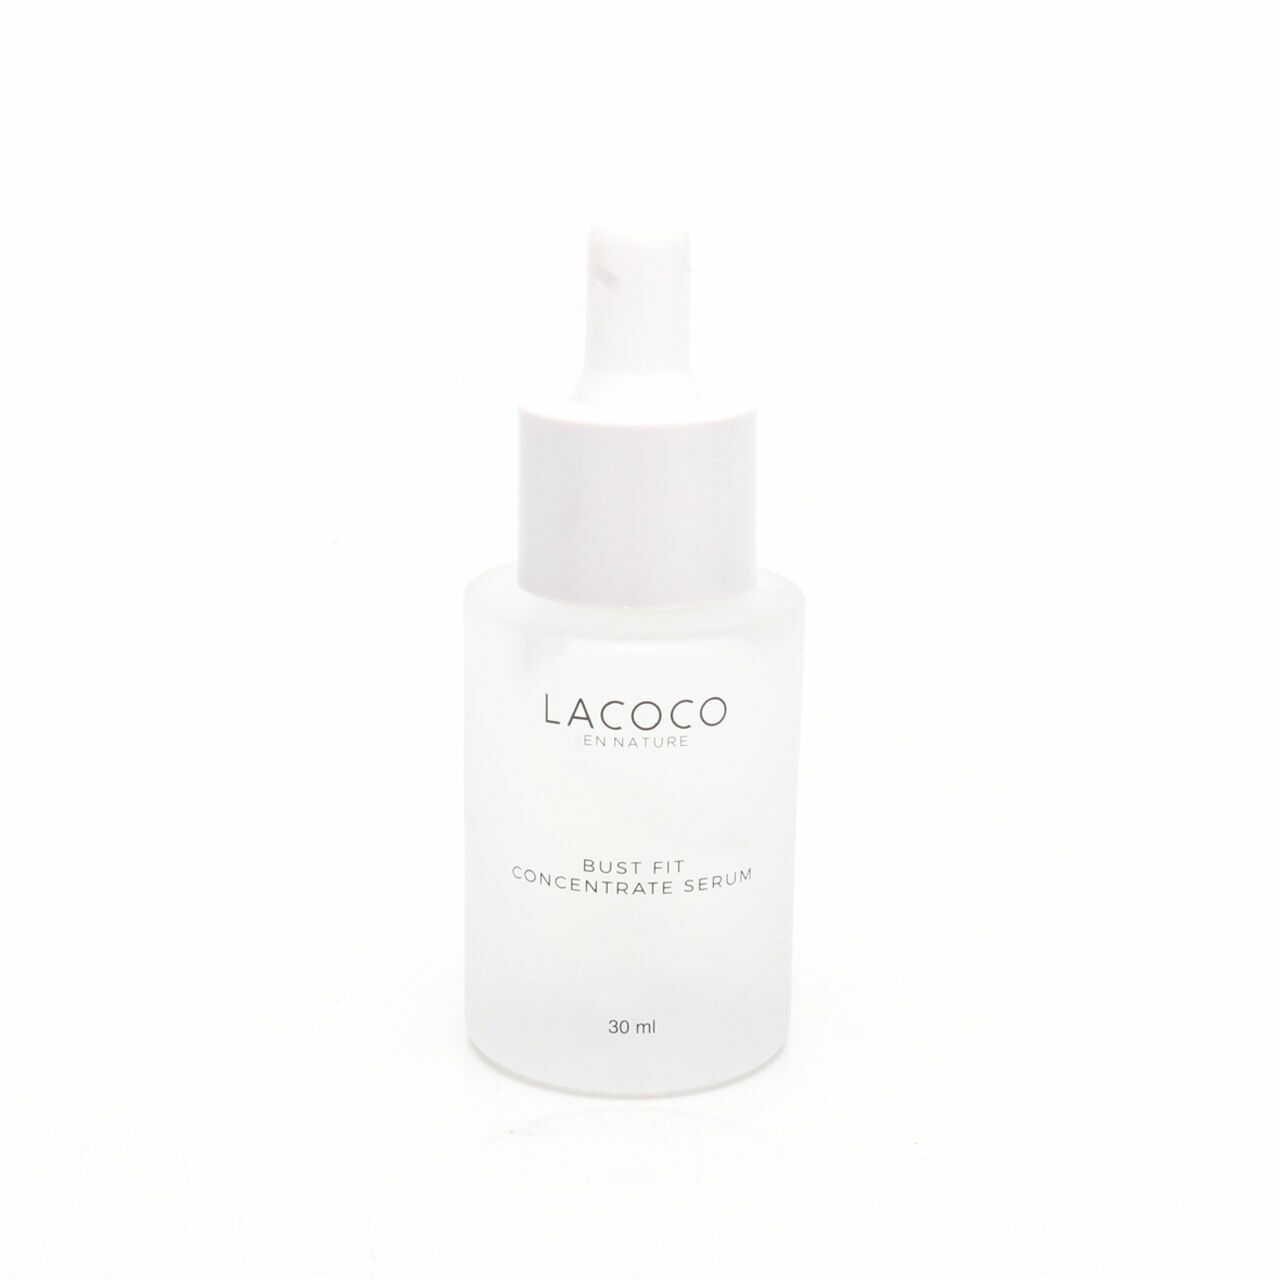 Lacoco en nature Bust Fit Concentrate Serum Body Care